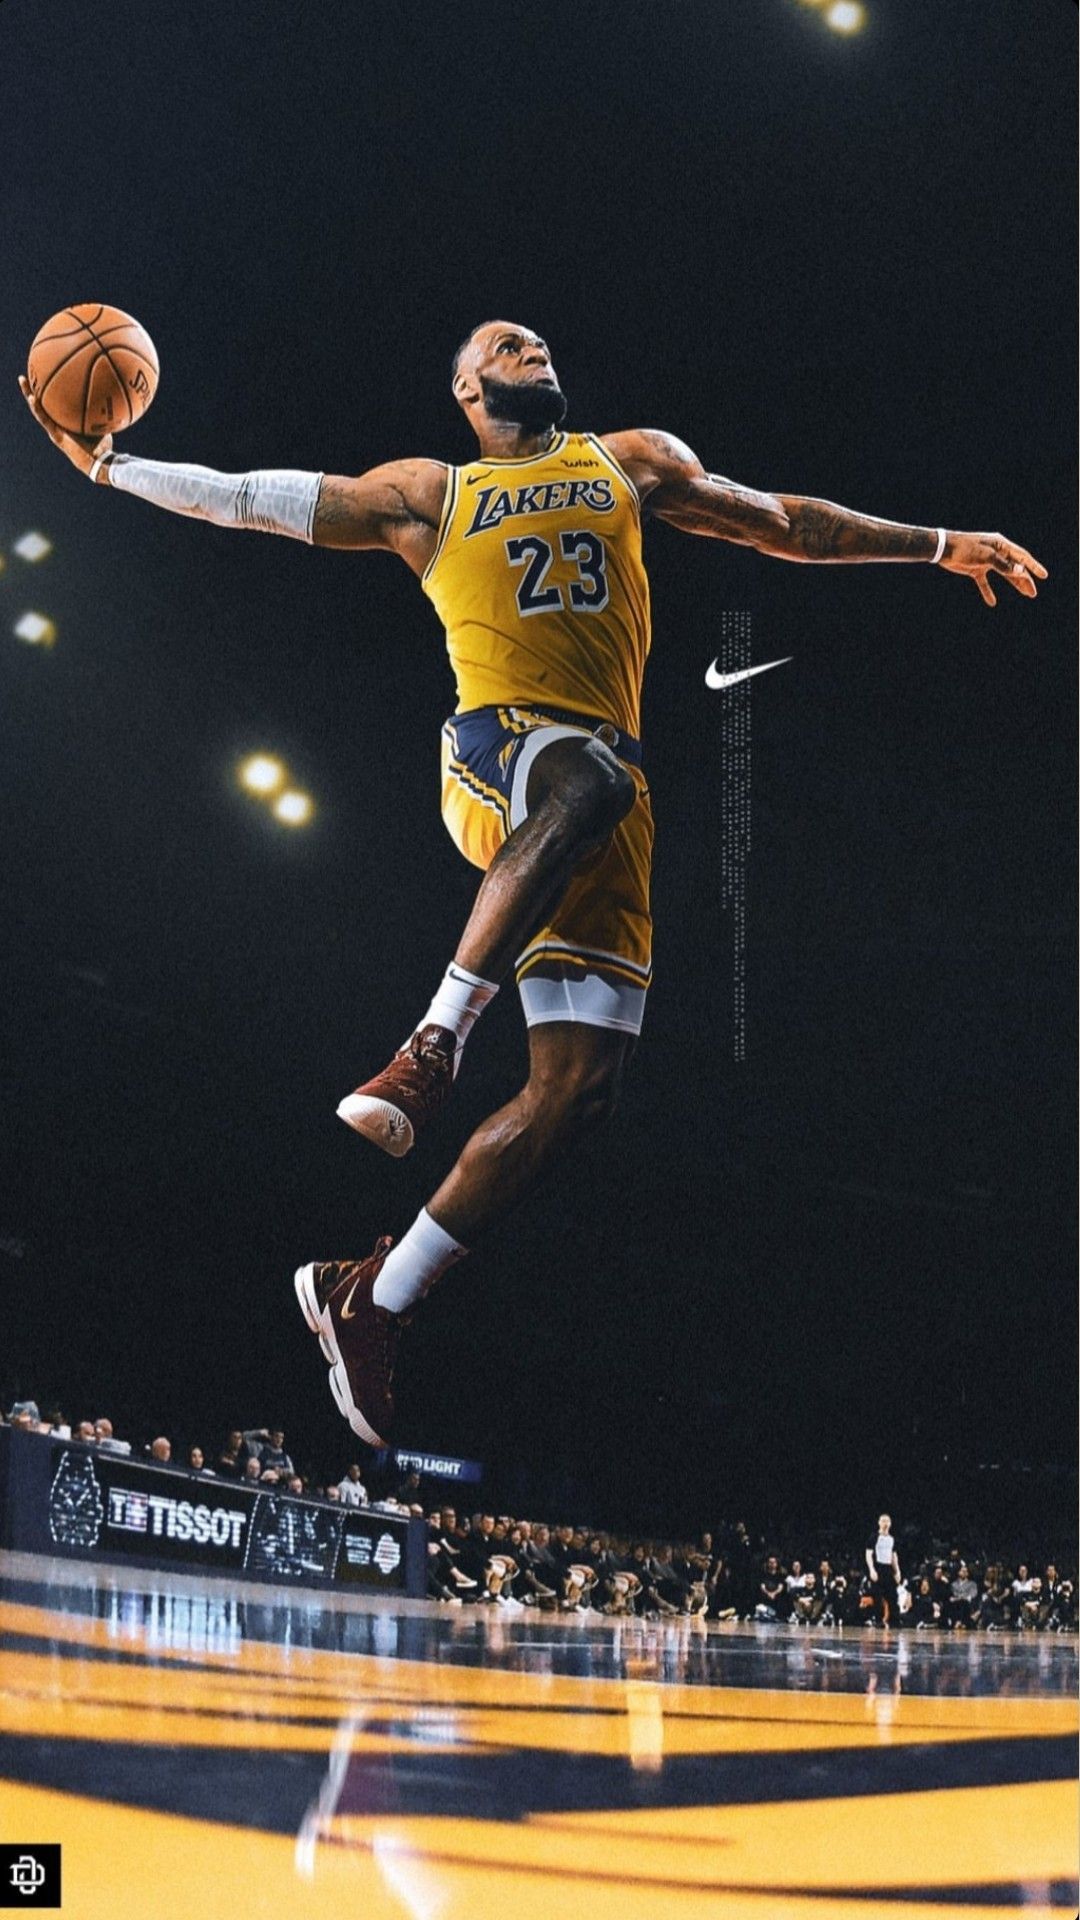 IPhone wallpaper of Lebron James jumping up to dunk the ball - Lebron James